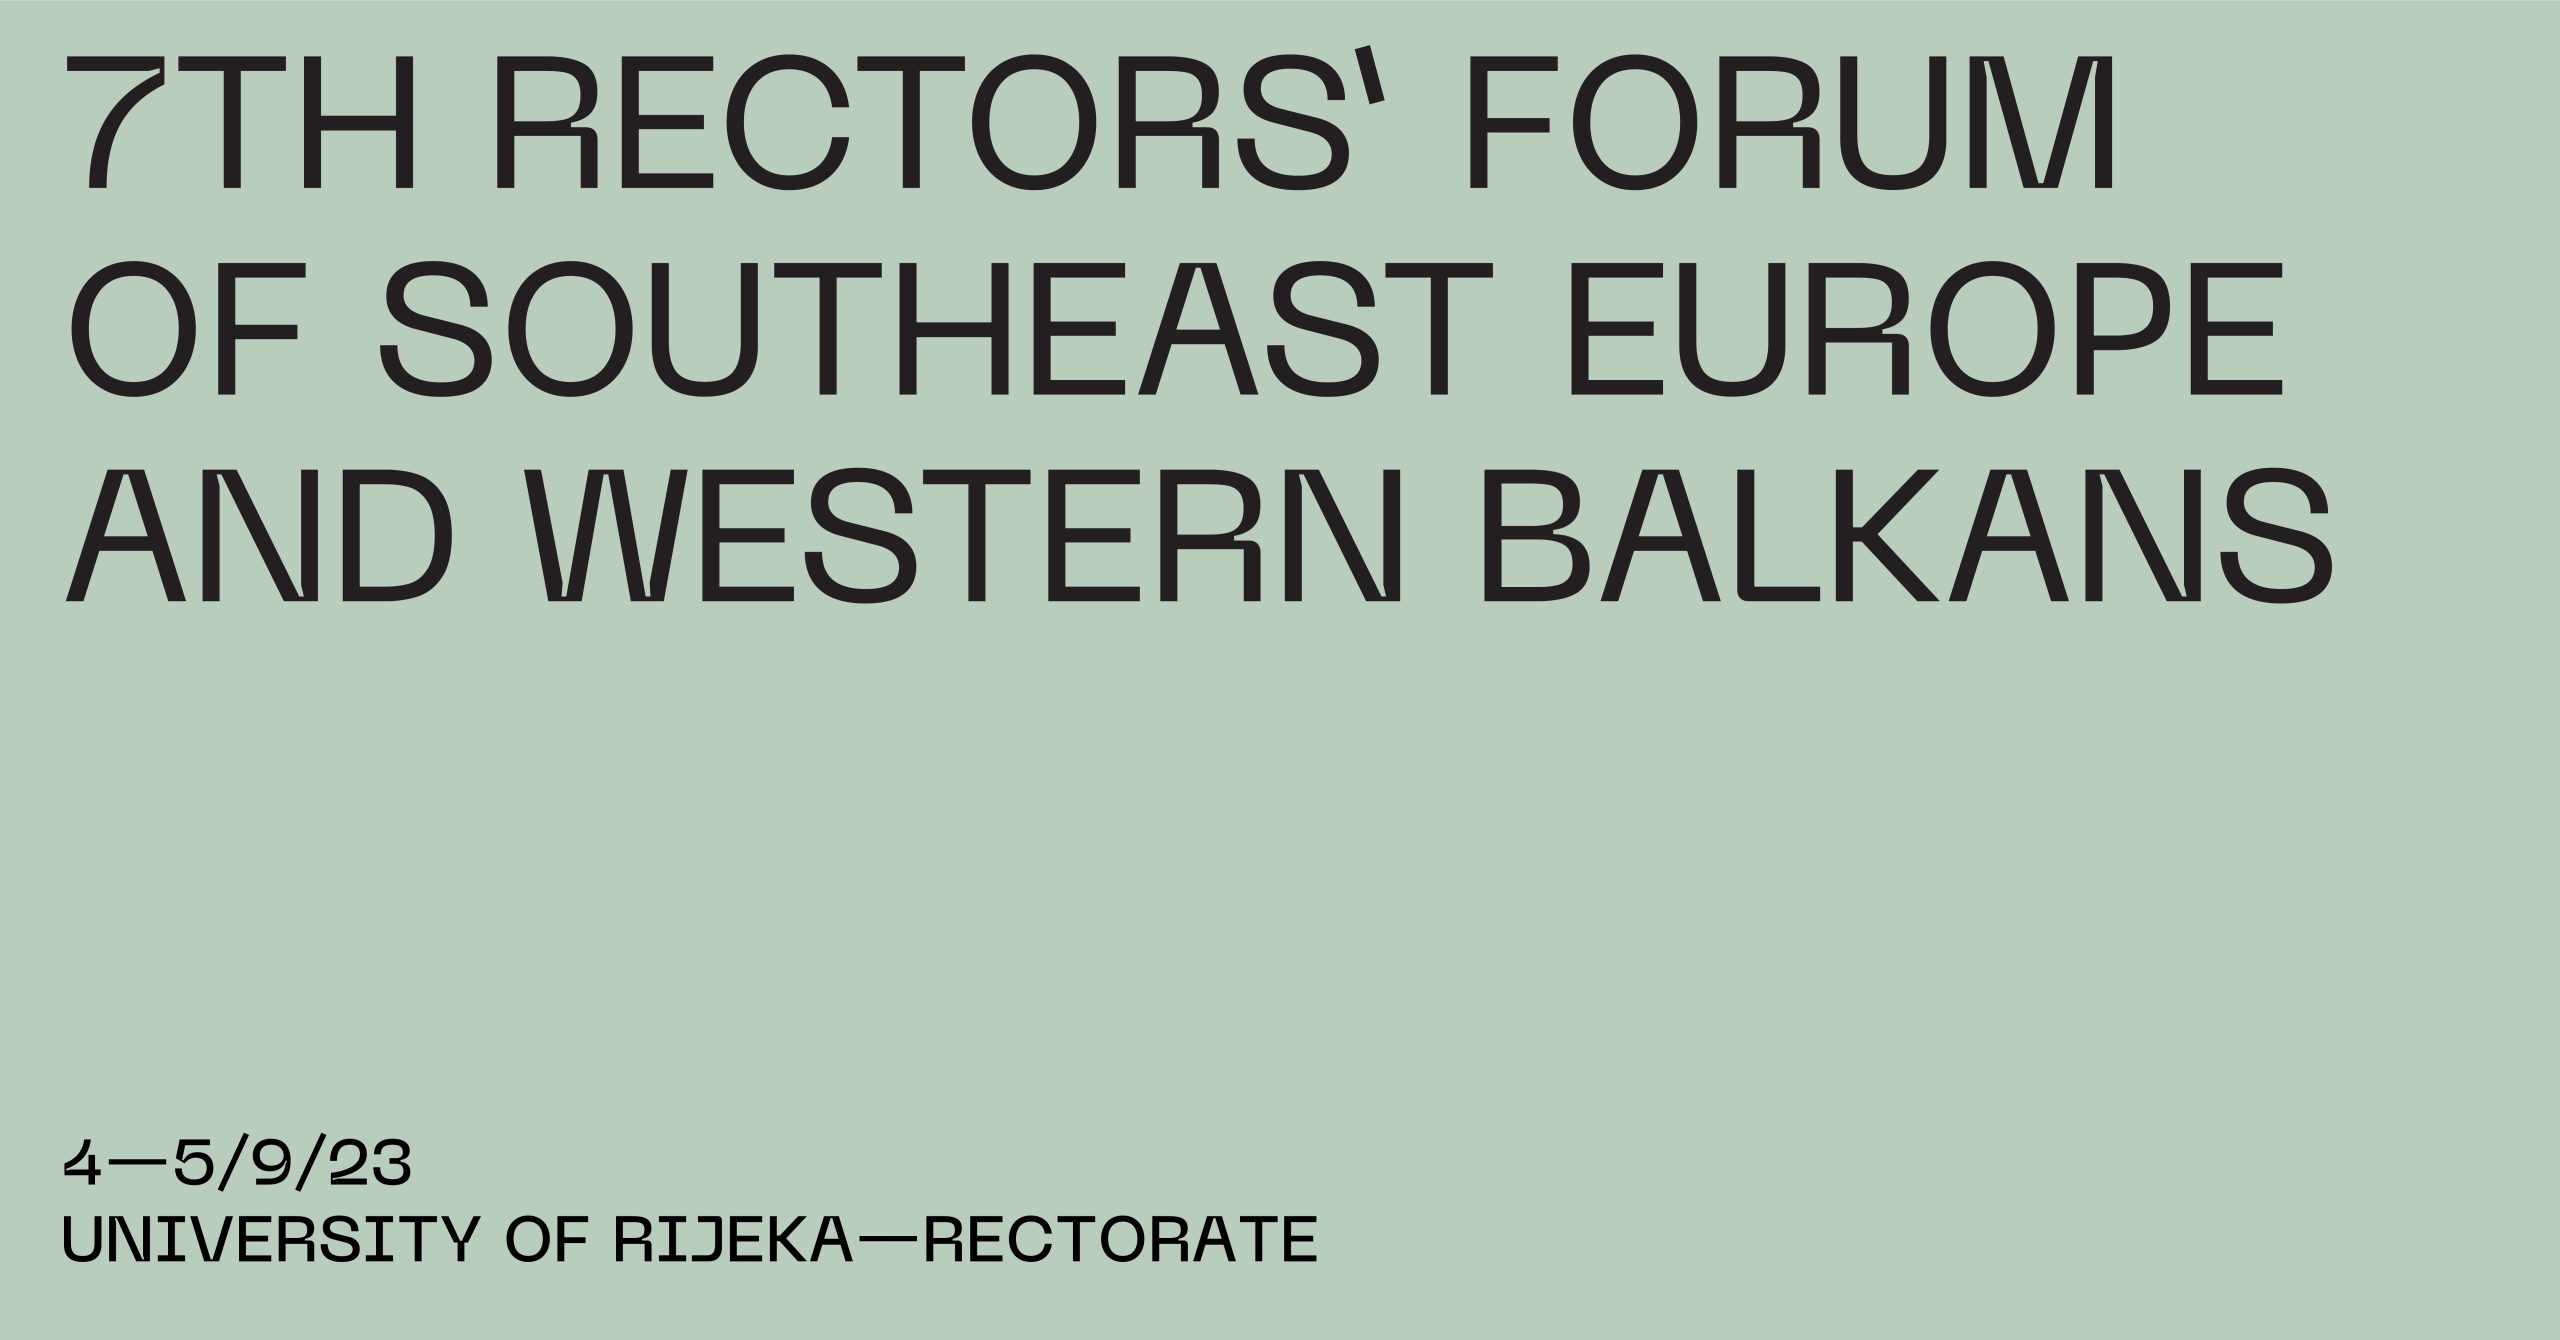 7TH RECTORS’ FORUM OF SOUTHEAST EUROPE AND WESTERN BALKANS